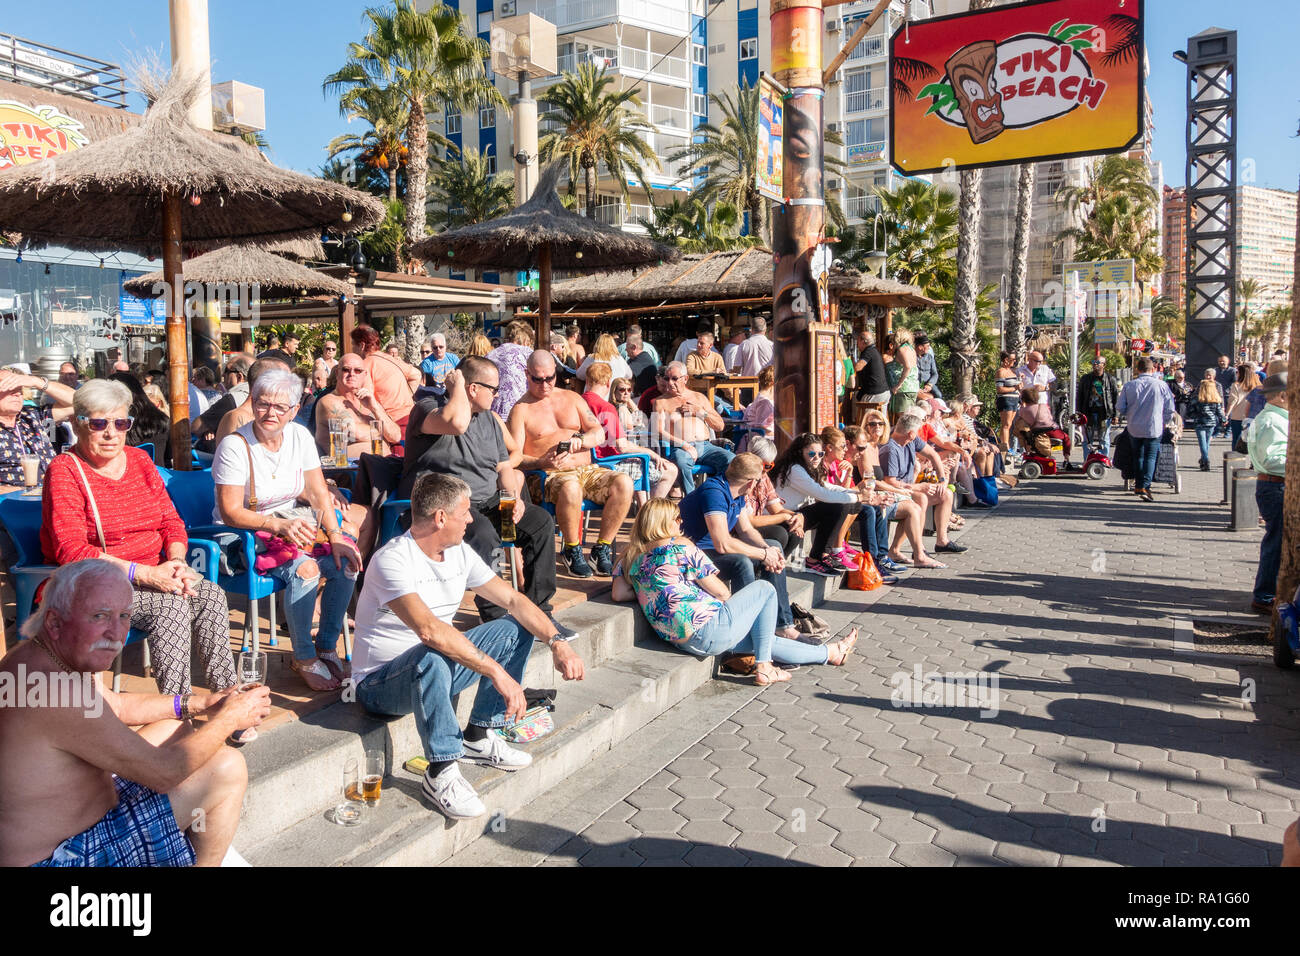 Benidorm, Spain. 30 December 2018. British tourists mix with locals on the beaches and in the bars and restaurants as they escape the cold British weather and head south to Spain. High temperatures meant that the beaches were busy from early morning with families enjoying the calm sea and temps of about 17 Celsius. Hotel occupancy is 90% for the Christmas and New Year period in this popular Spanish resort. Credit: Mick Flynn/Alamy Live News Stock Photo